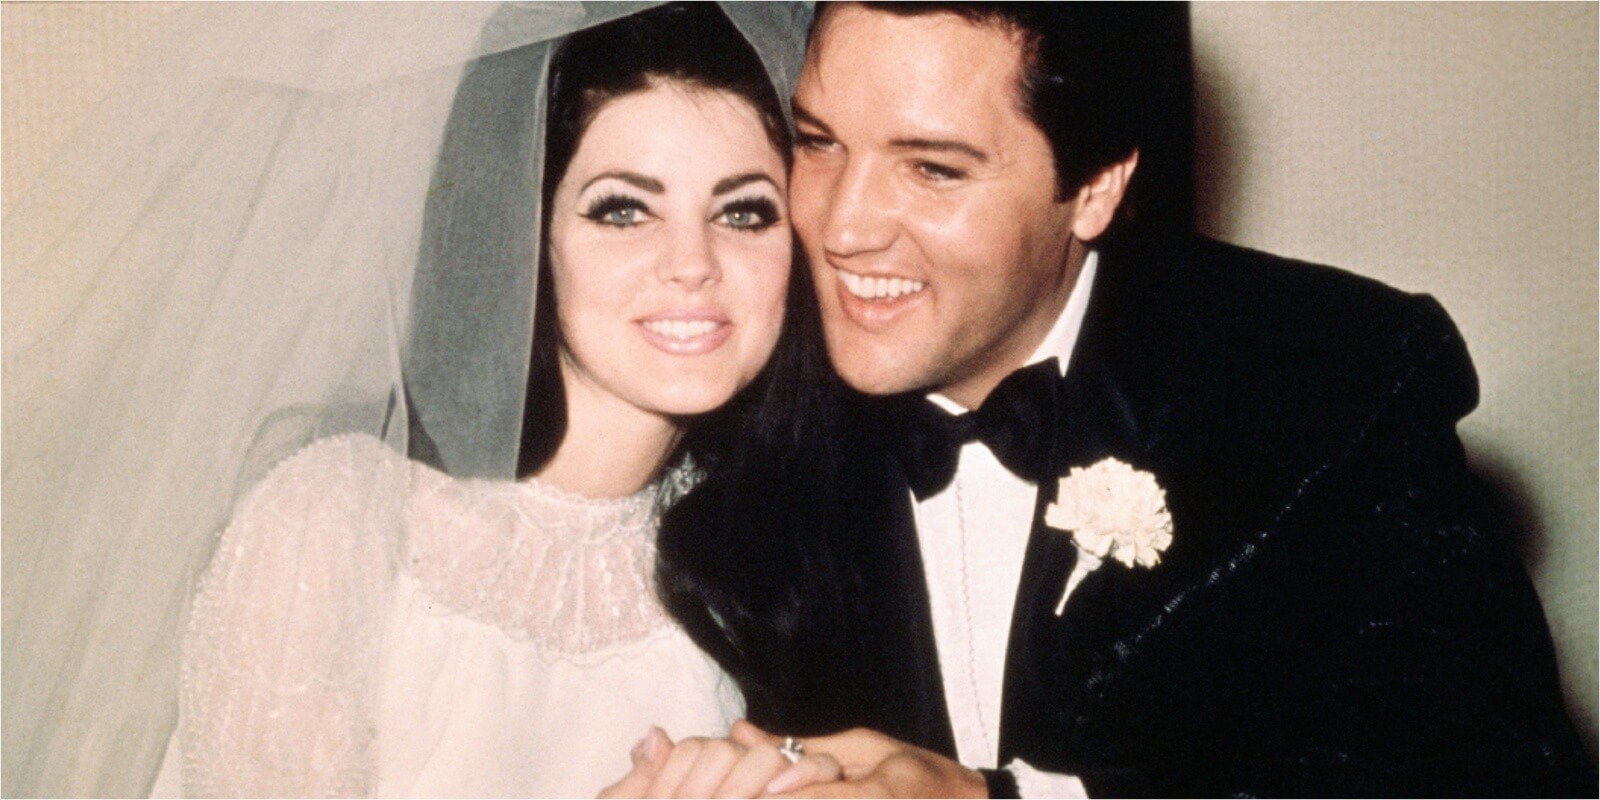 You are currently viewing Priscilla Presley Reveals if She and Elvis Presley Would Have Ever Remarried